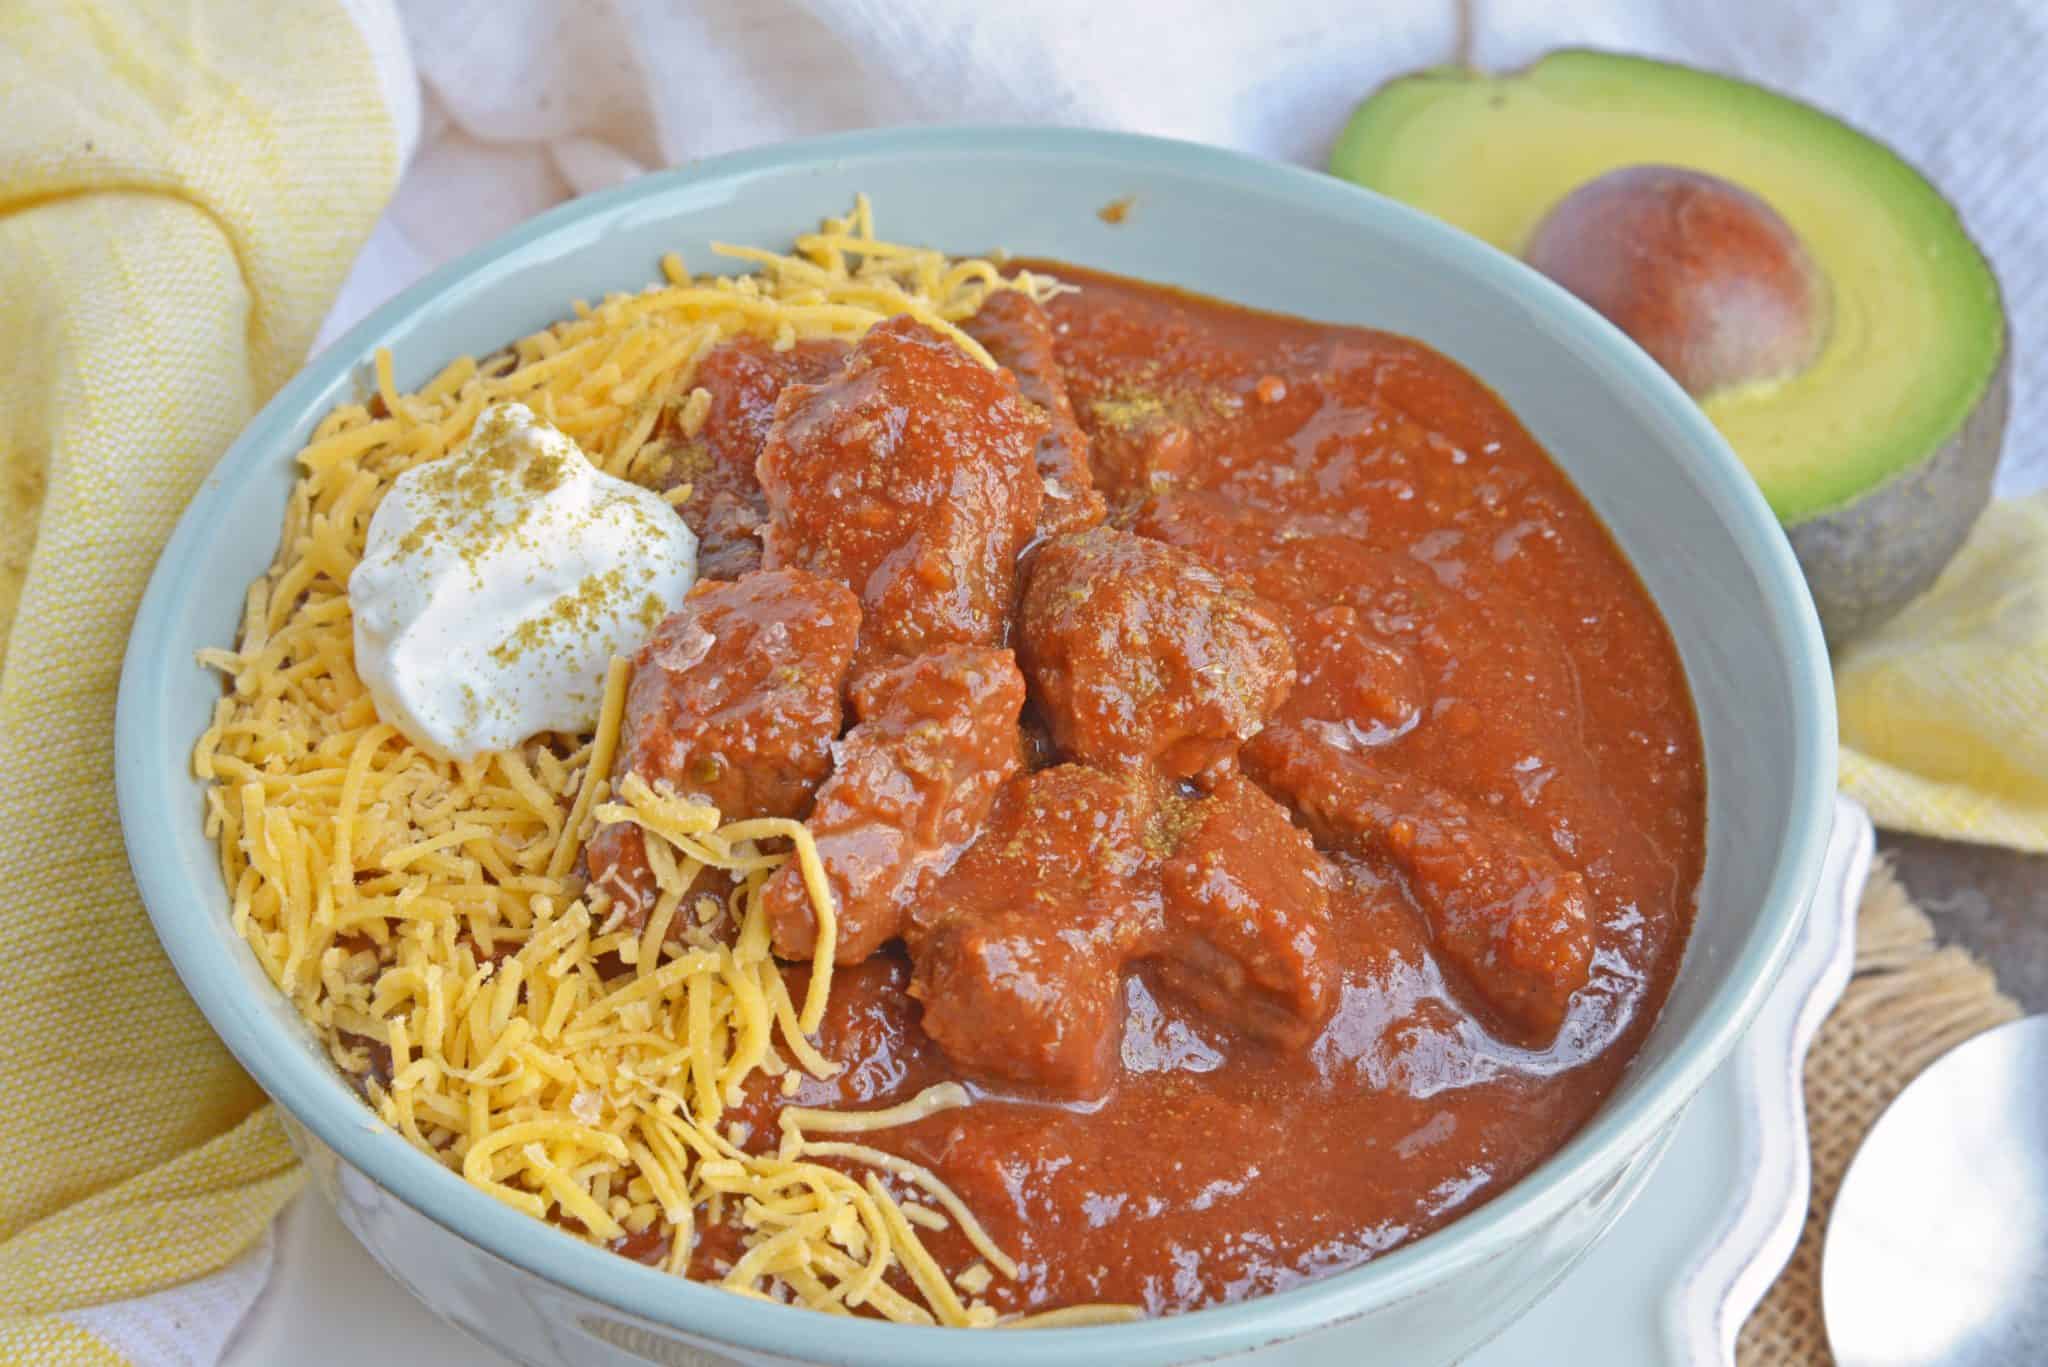 Red Beef Chili uses chunks of steak and simmers them to tender perfection in a chili tomato sauce. Serve over rice, noodles or as a stew. #bestchilirecipe #bobbyflay #redbeefchili www.savoryexperiments.com